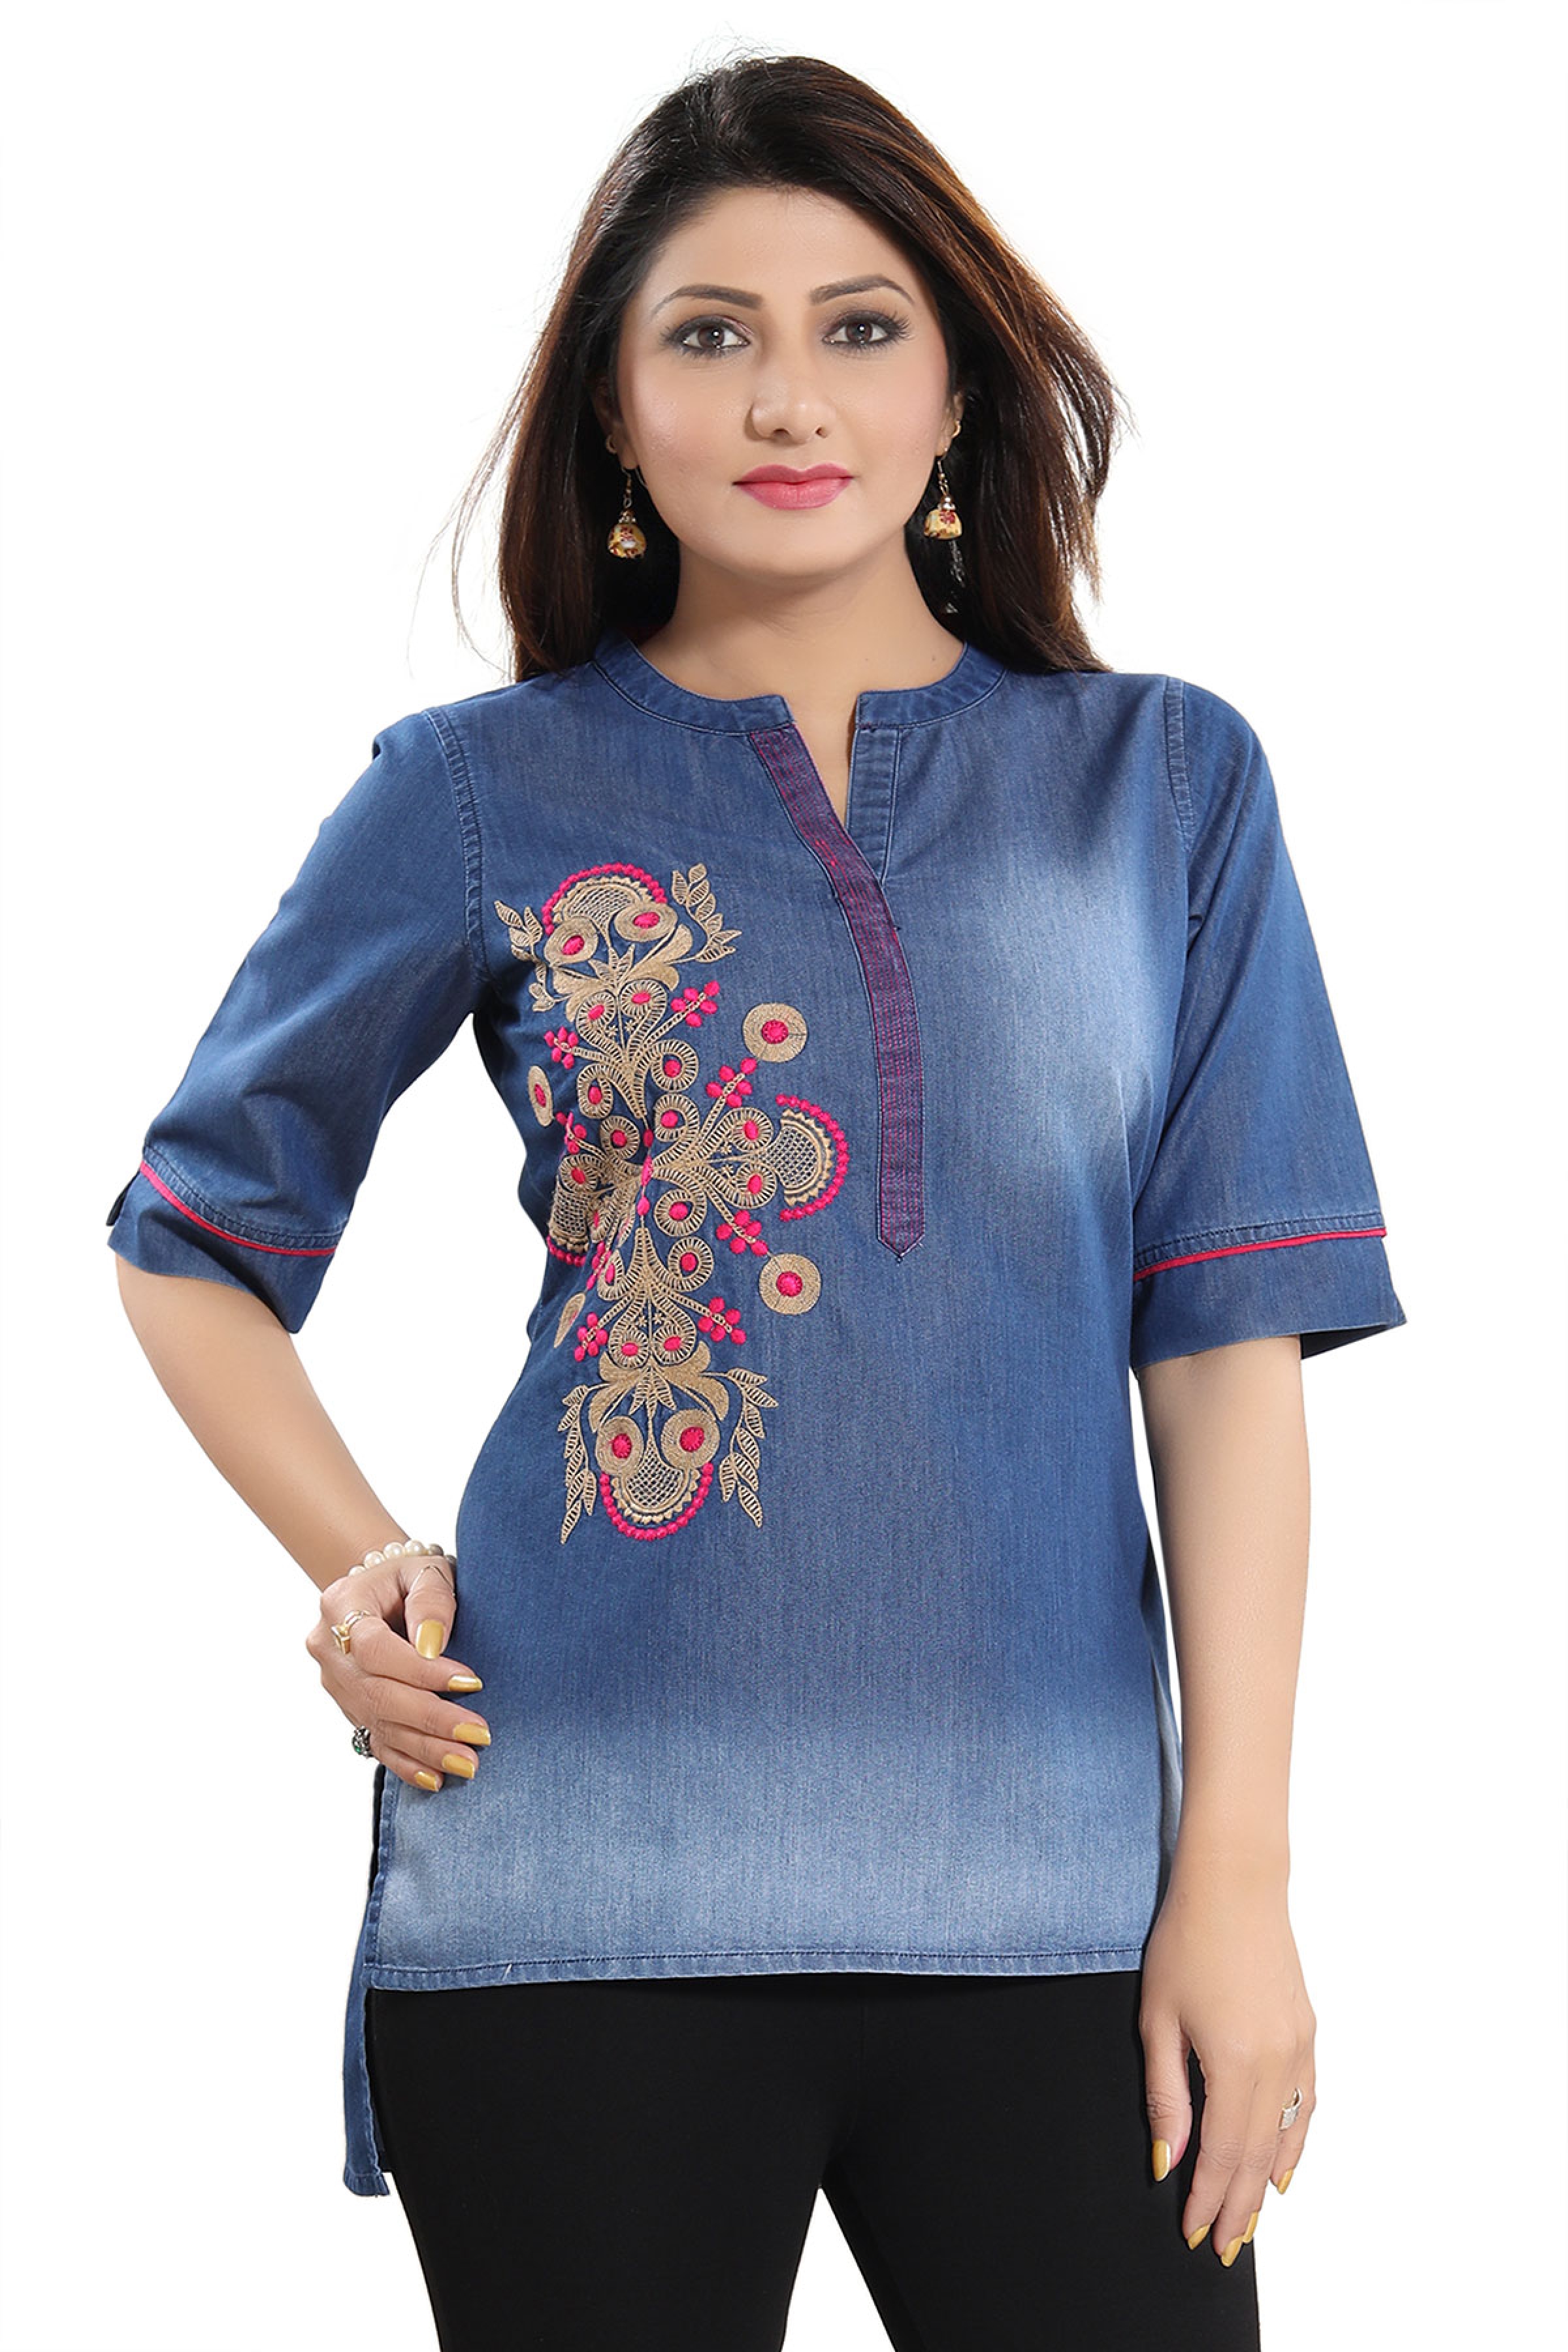 Denim Dream Tunic with Beautiful Embroidery Short Top for Everyday Wear